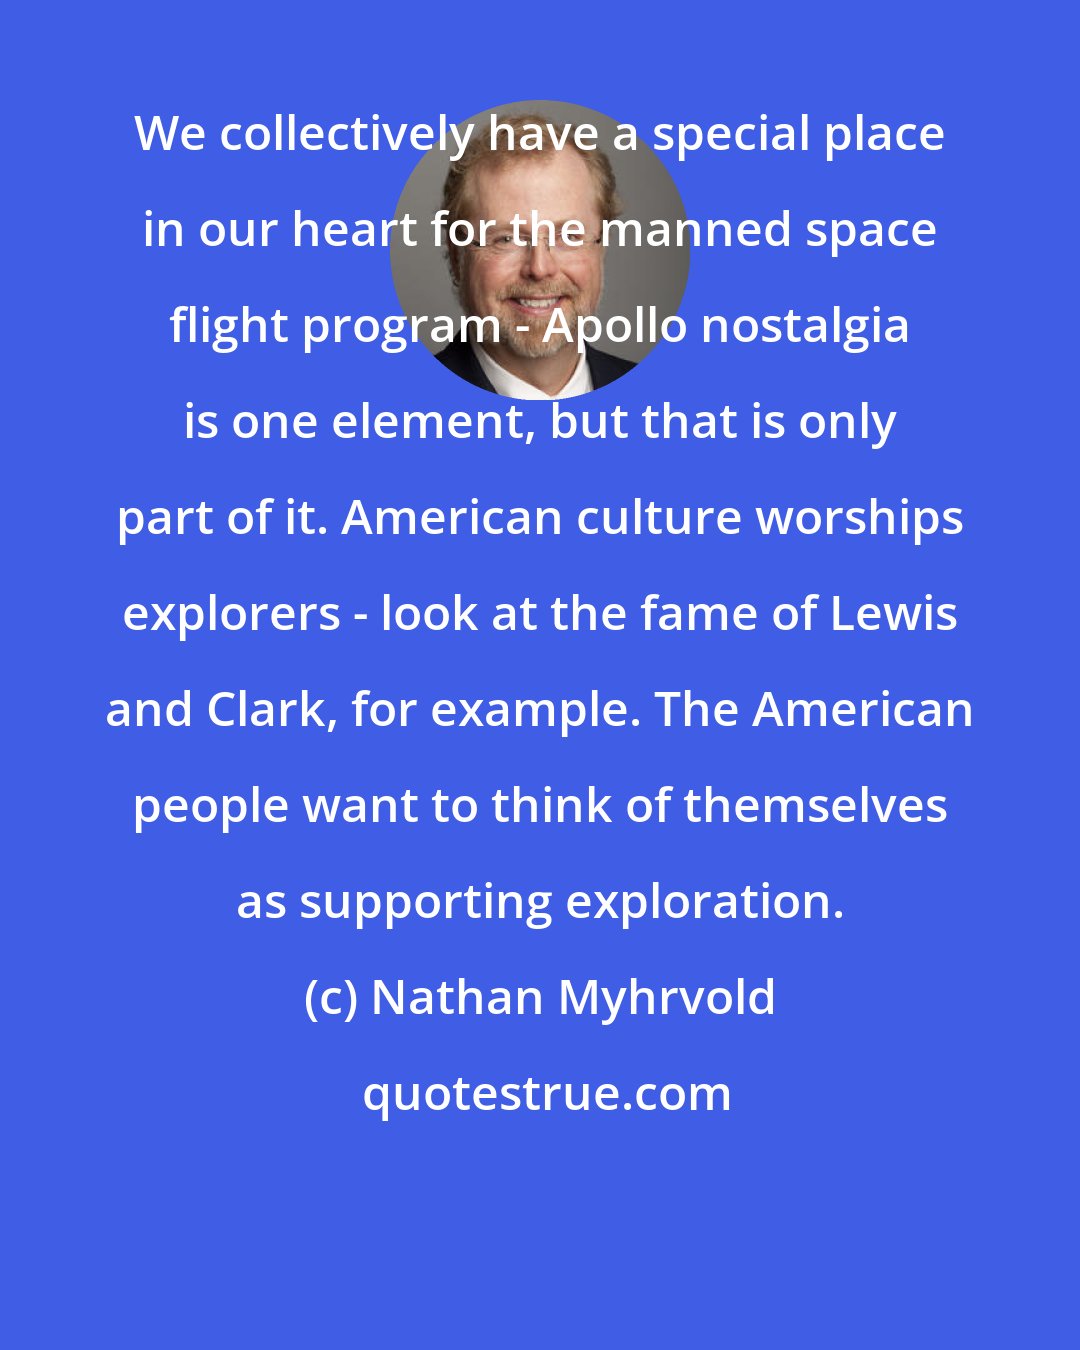 Nathan Myhrvold: We collectively have a special place in our heart for the manned space flight program - Apollo nostalgia is one element, but that is only part of it. American culture worships explorers - look at the fame of Lewis and Clark, for example. The American people want to think of themselves as supporting exploration.